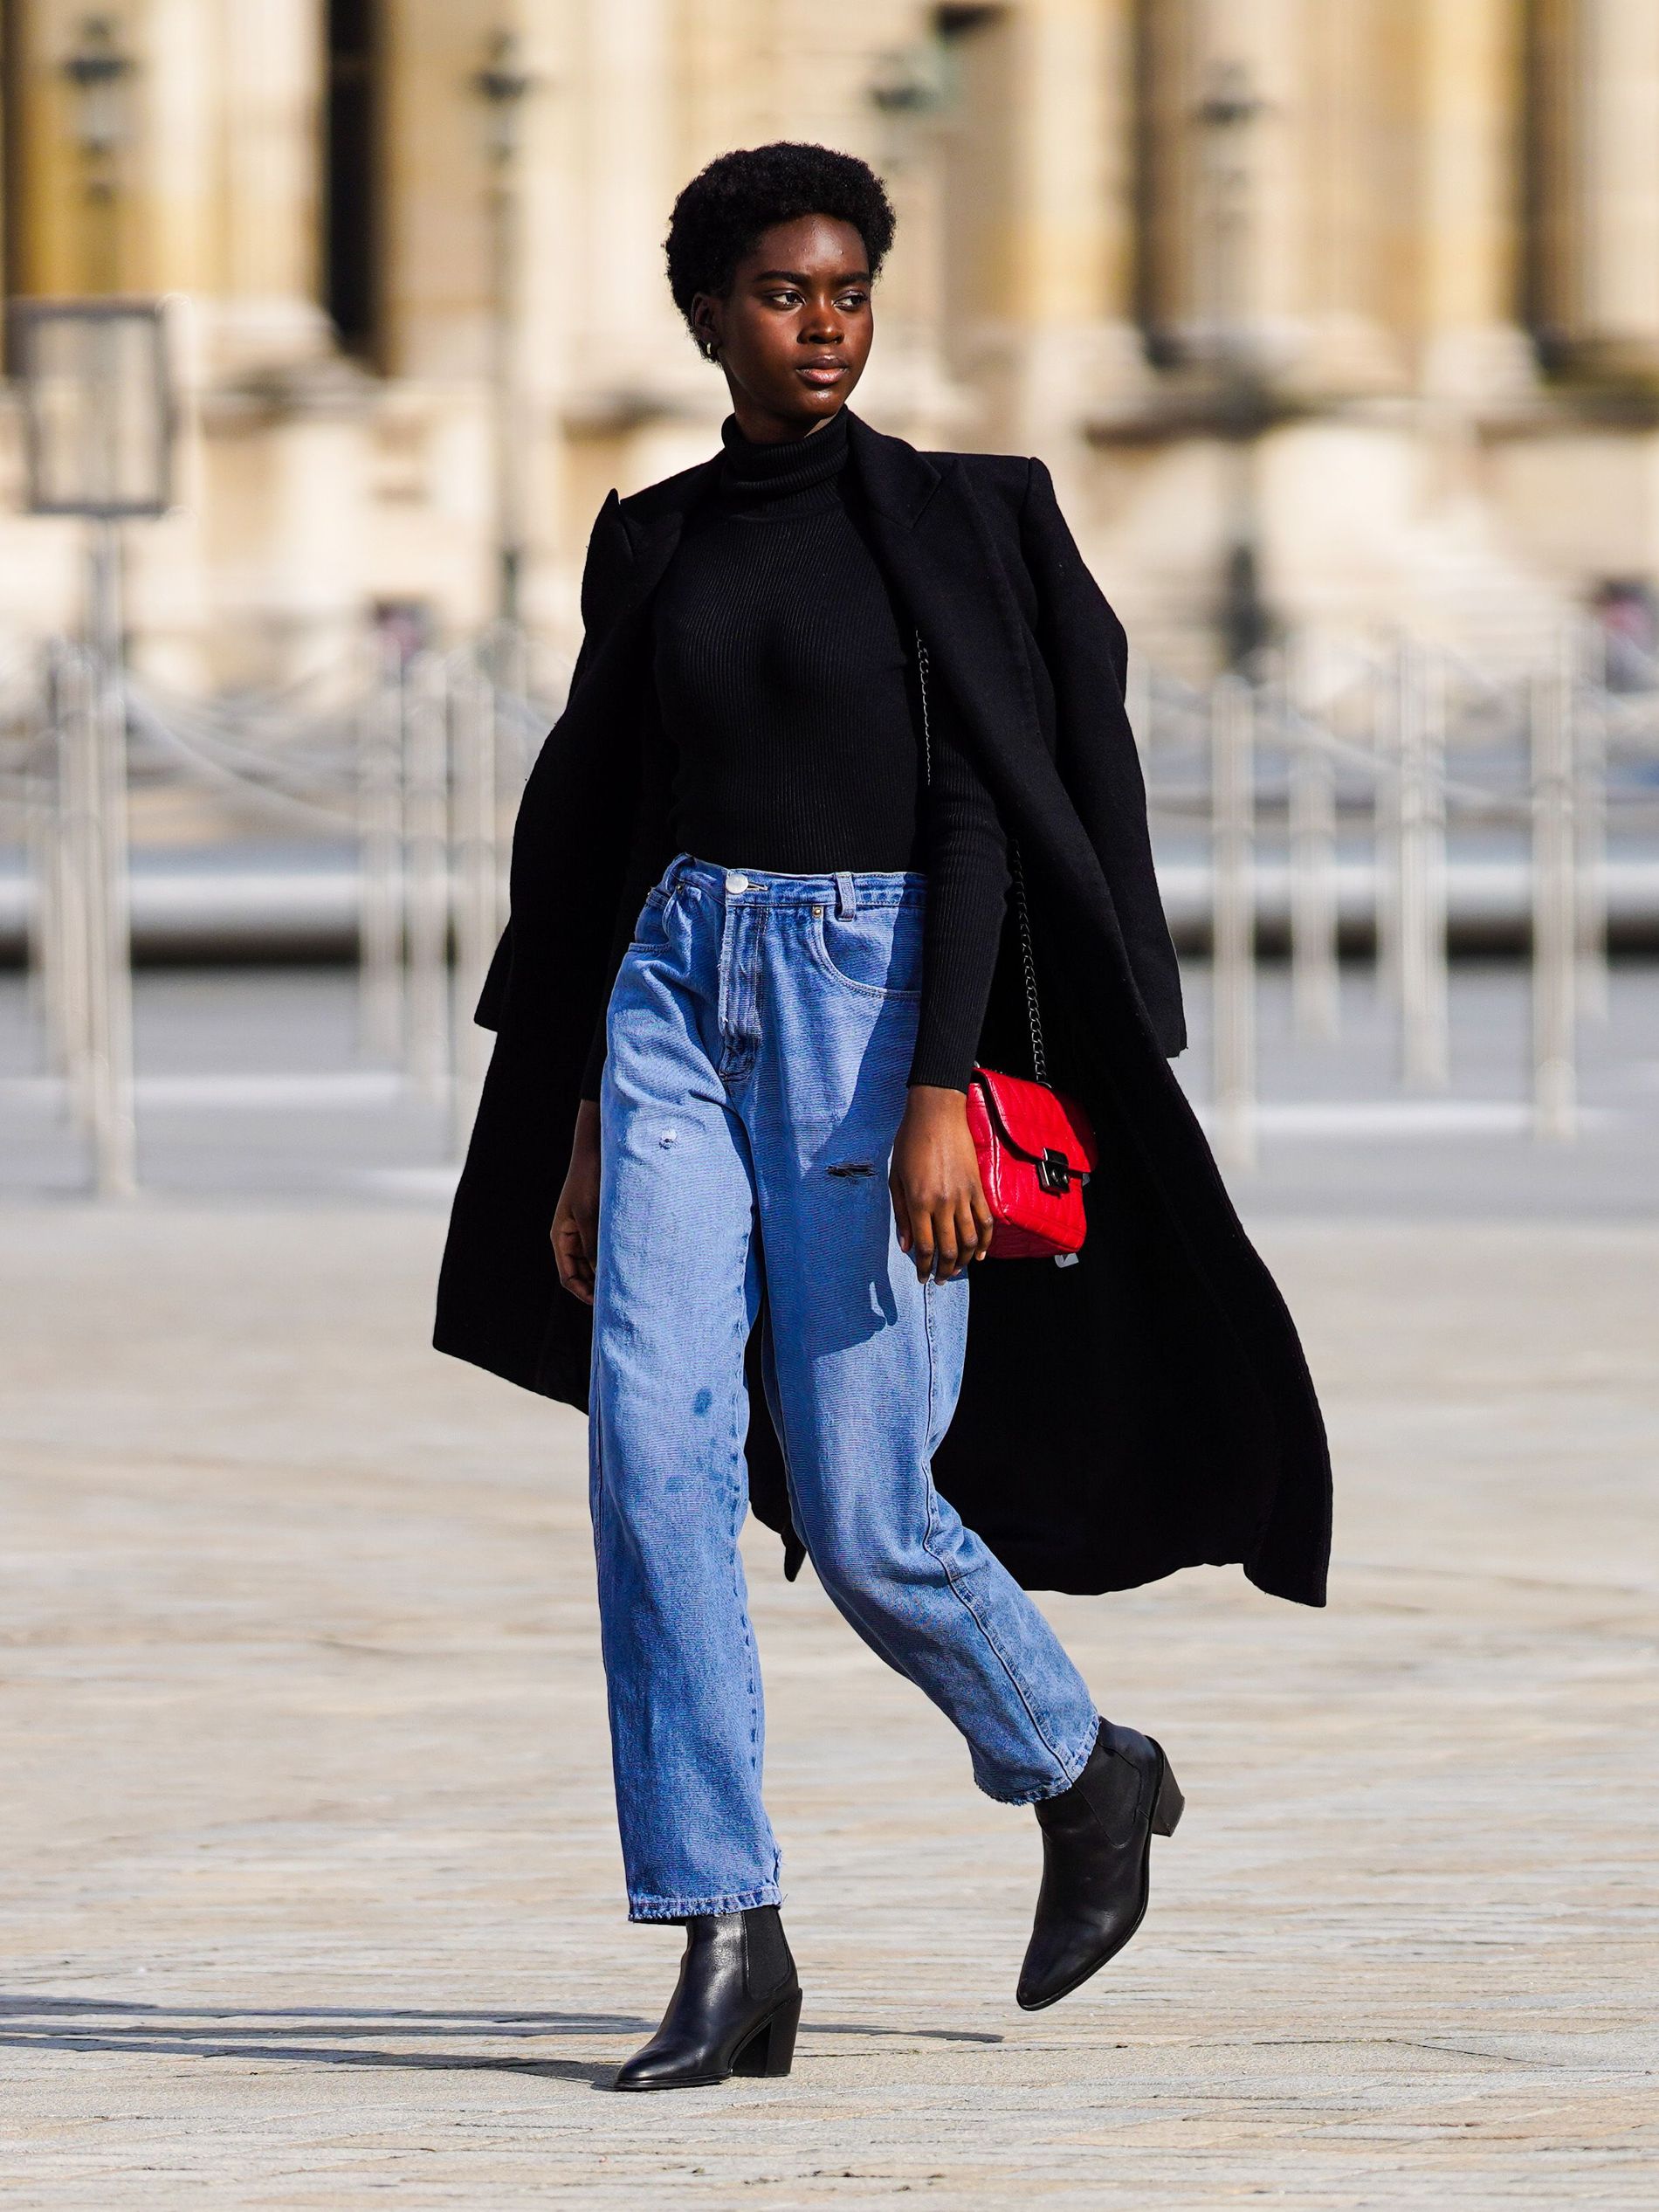 The classic, black coat paired with a colourful bag